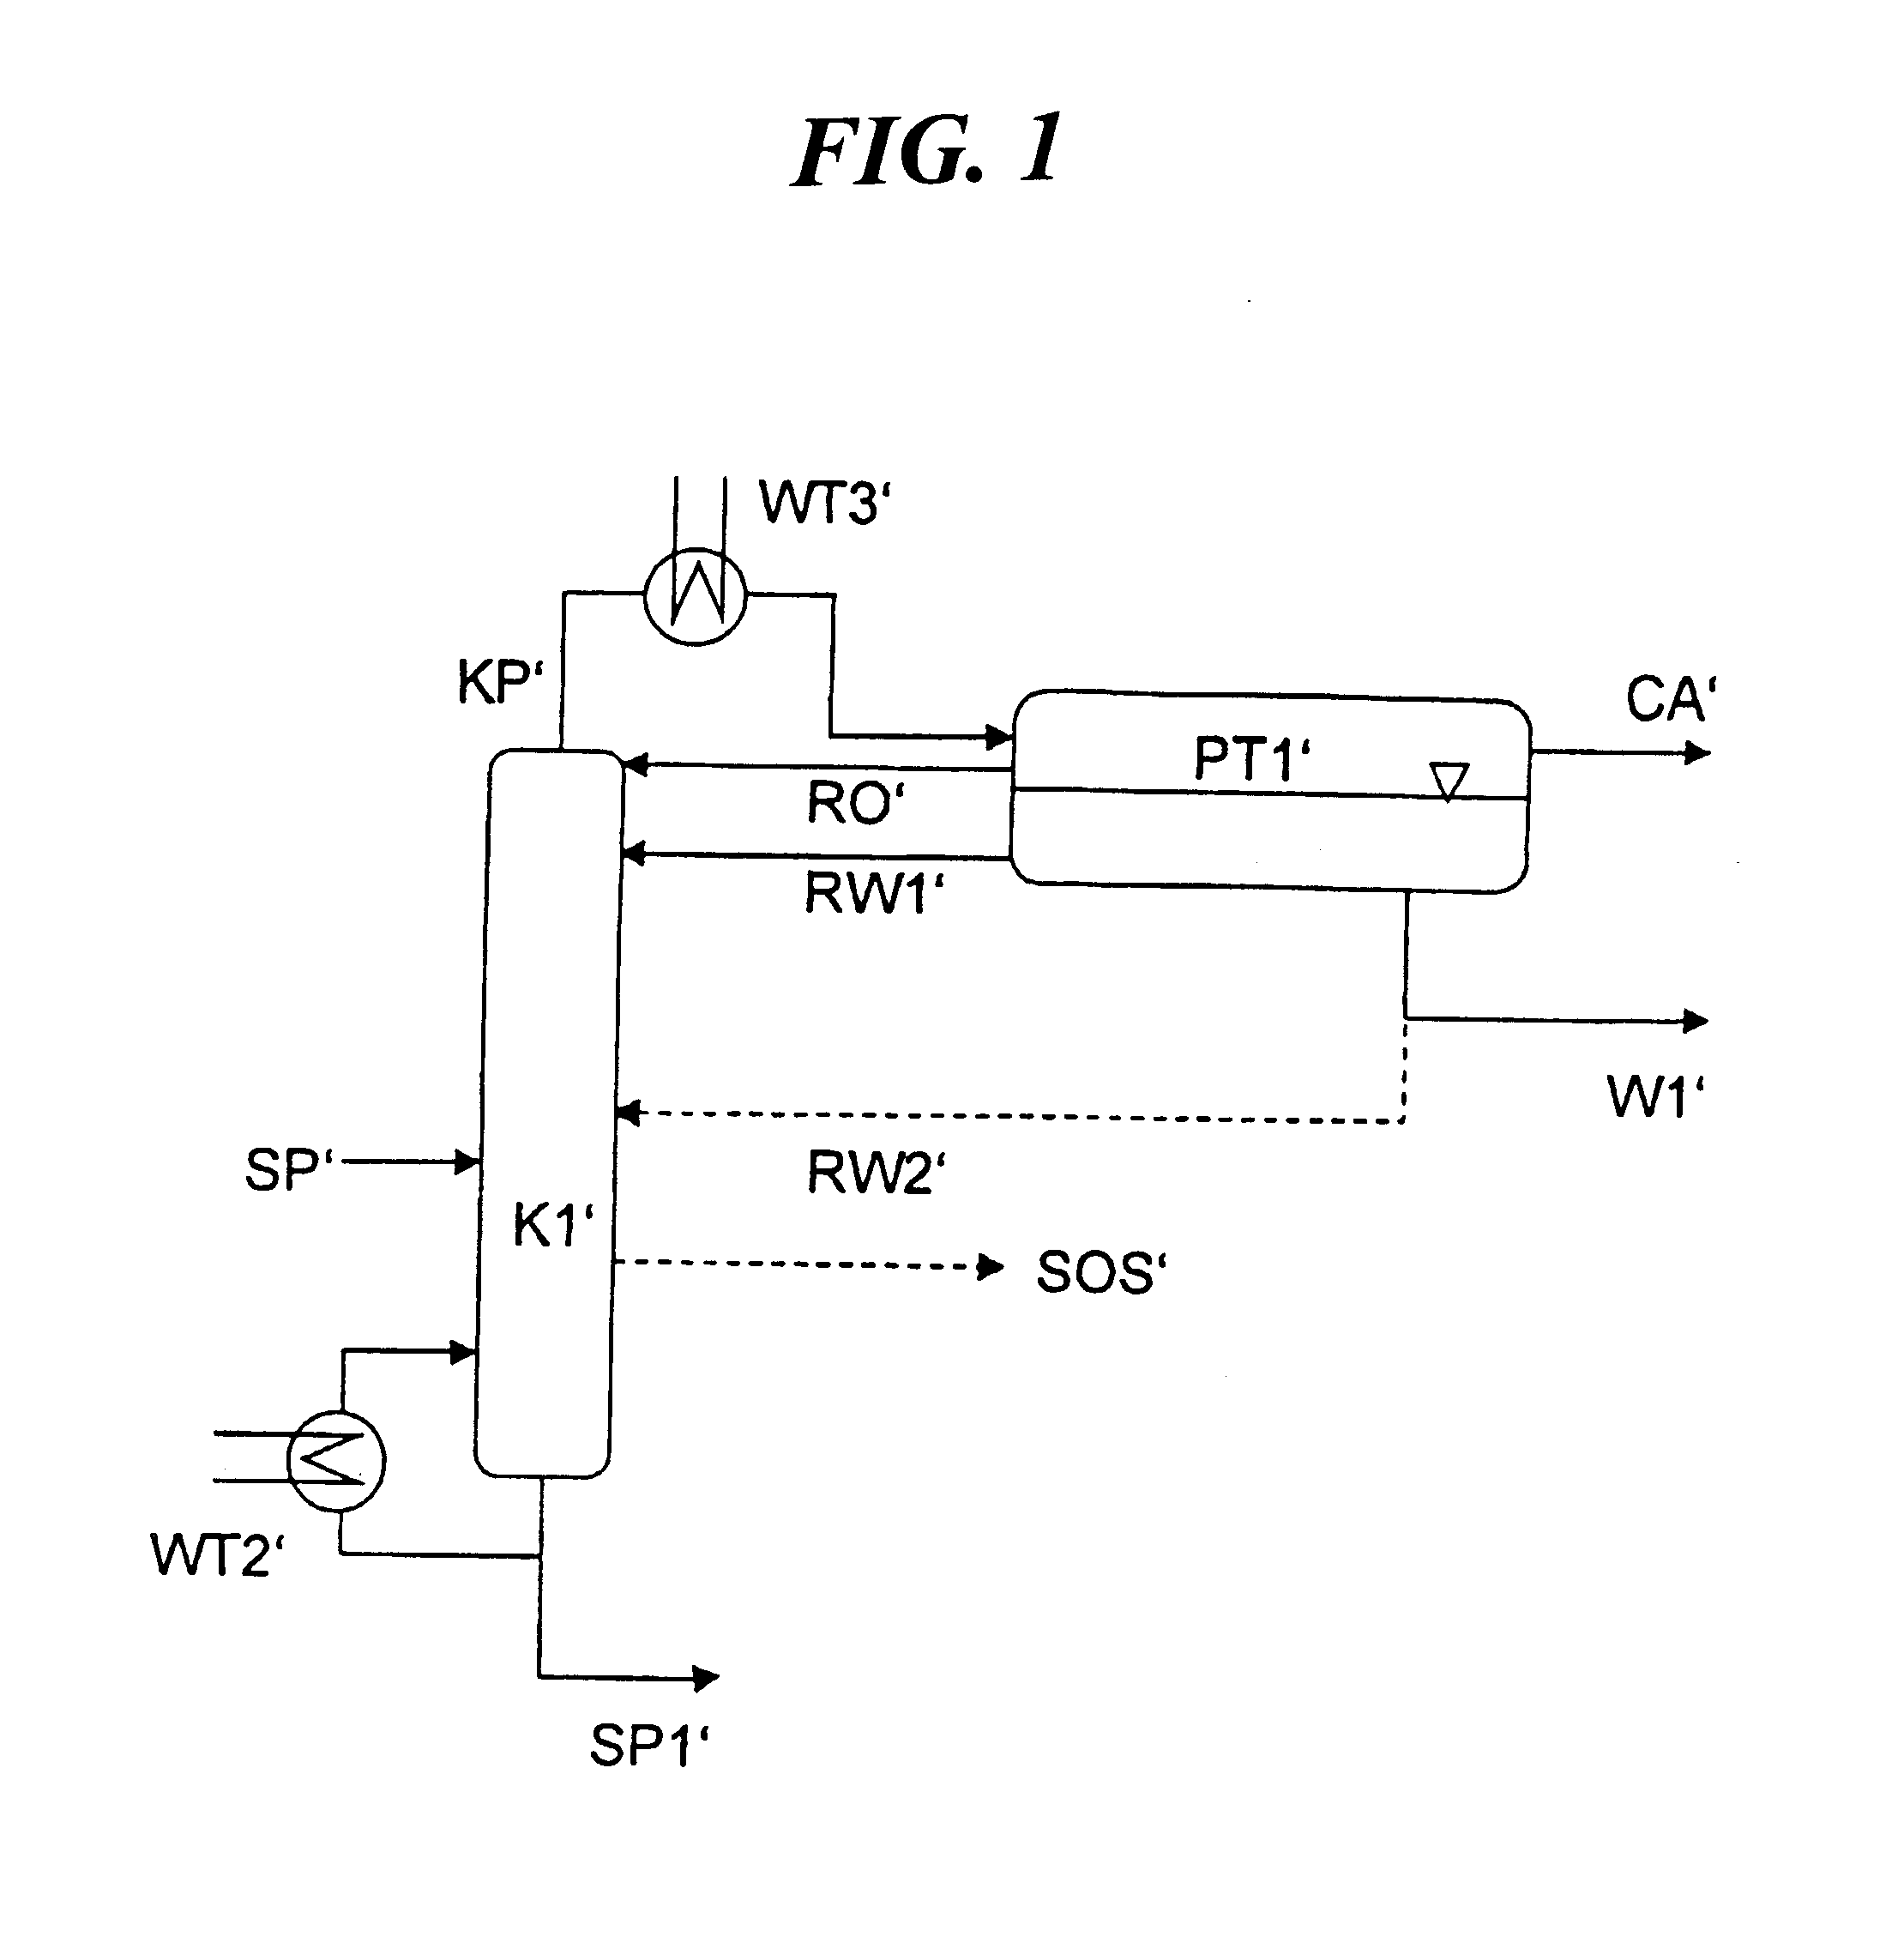 Process for separating phenol from a mixture comprising at least hydroxyacetone, cumene, water and phenol